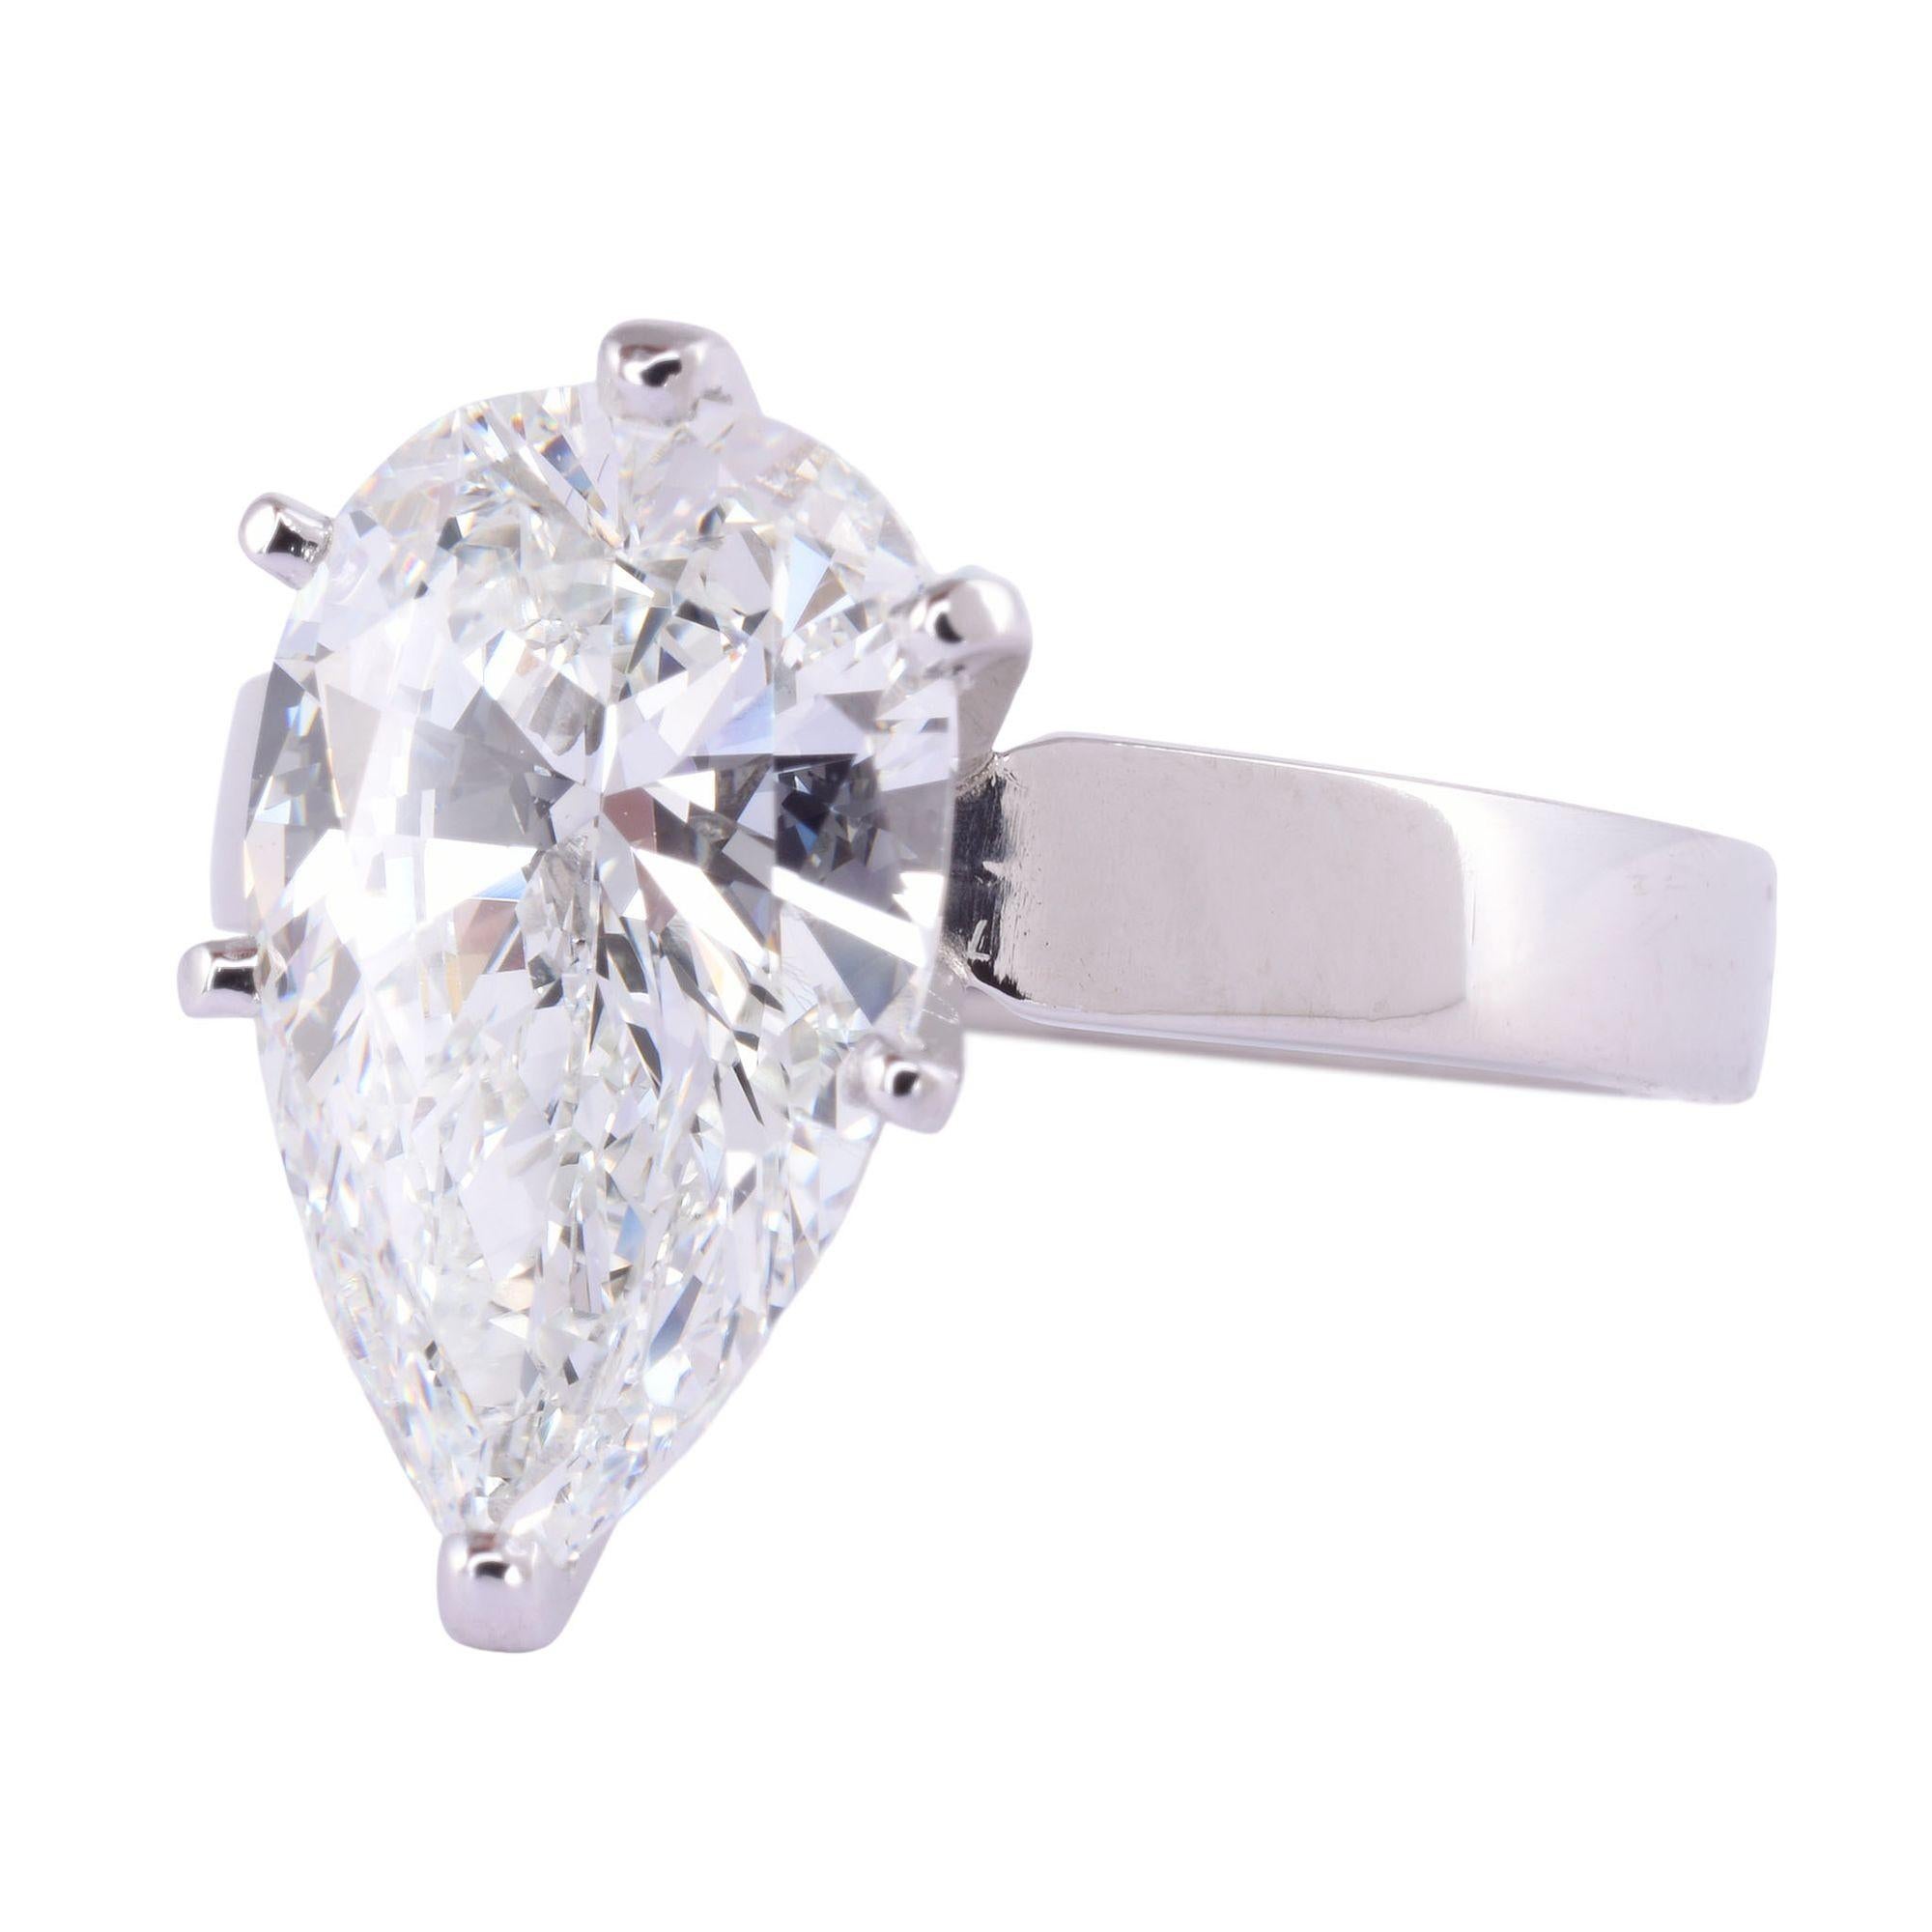 Estate GIA Certified 3.07 Carat VS2 pear diamond solitaire engagement ring. This stunning custom platinum engagement ring features a GIA certified pear brilliant cut natural diamond at 3.07 carats with VS2 clarity and H color. The GIA diamond has